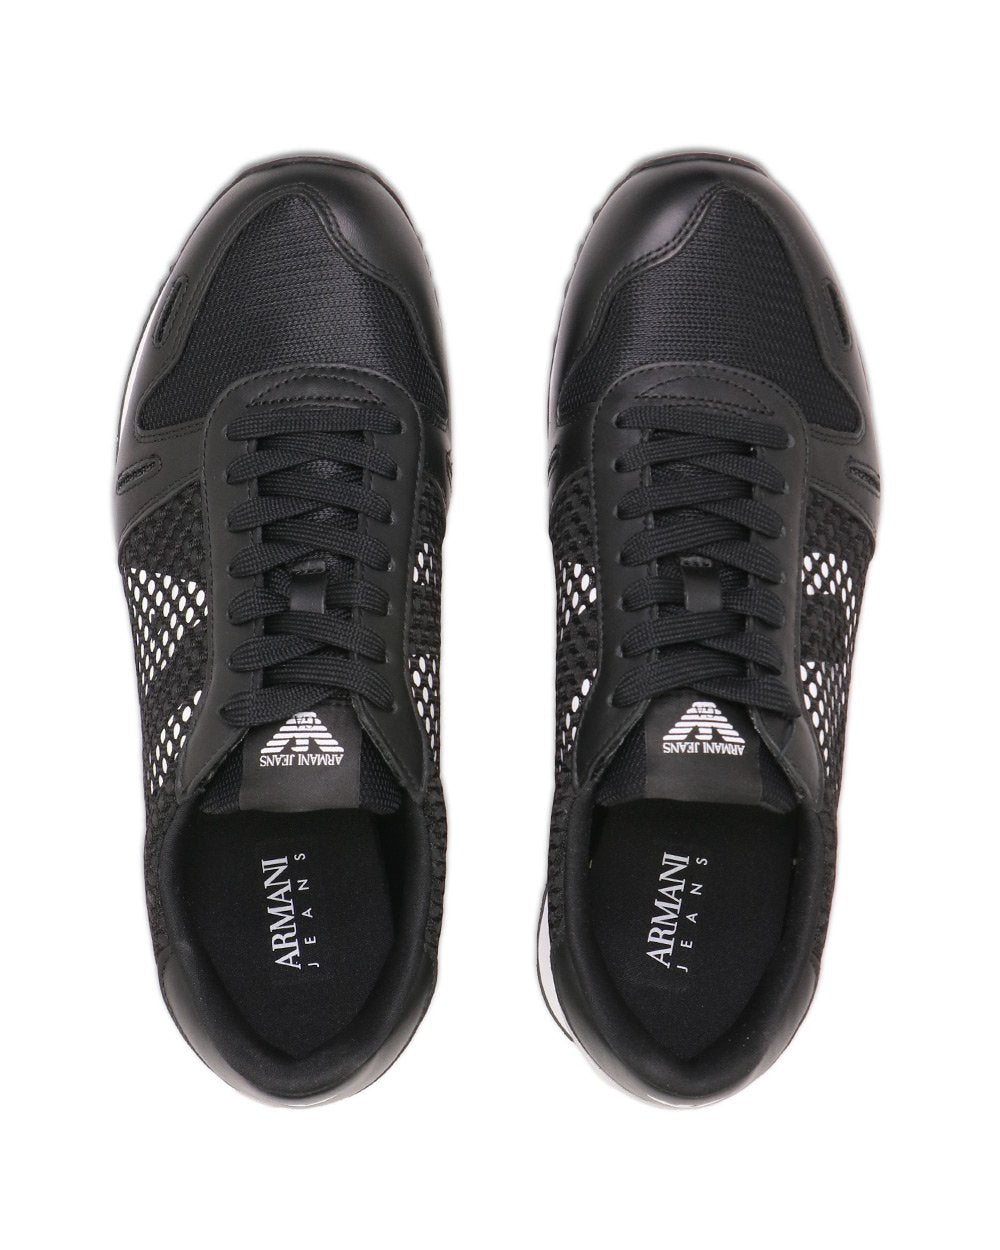 AJ Mesh Printed Sneakers - ISSI Outlet